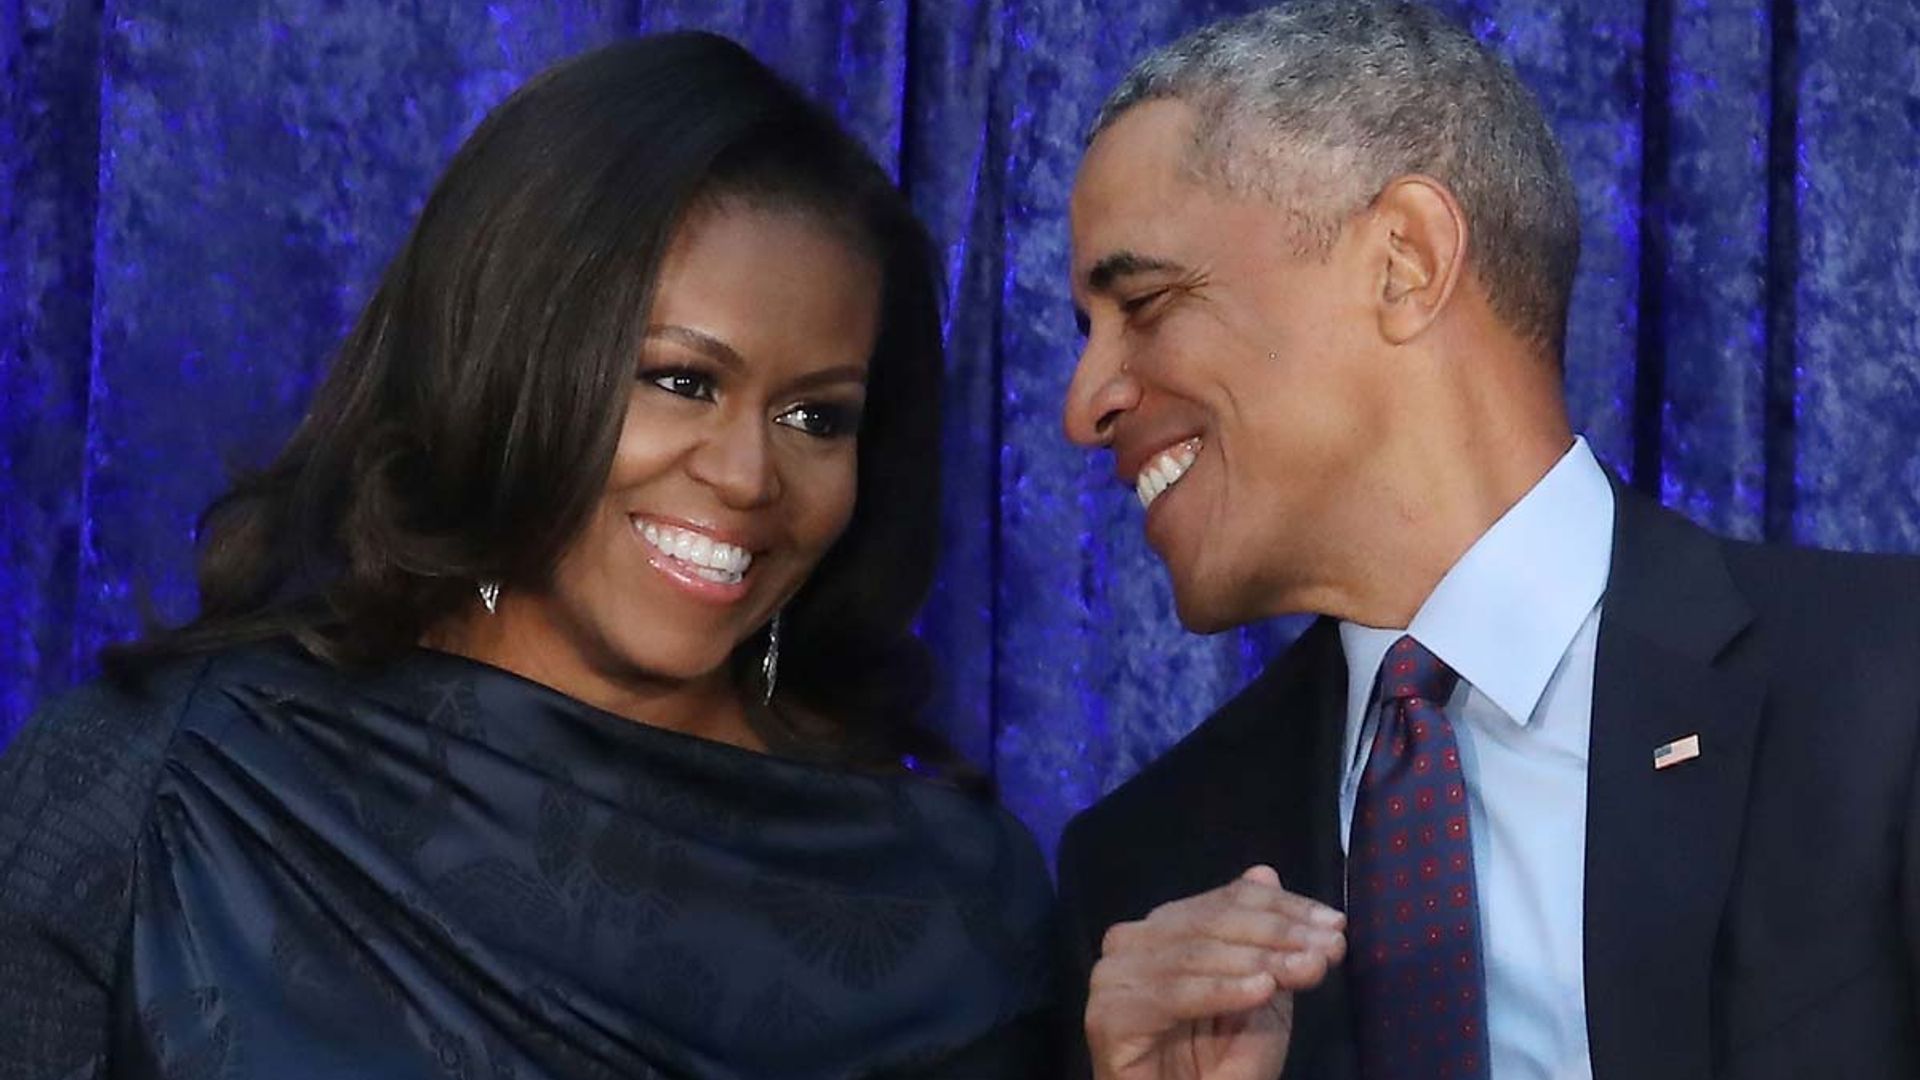 Barack Obama's fans can't stop talking about wife Michelle in latest family post